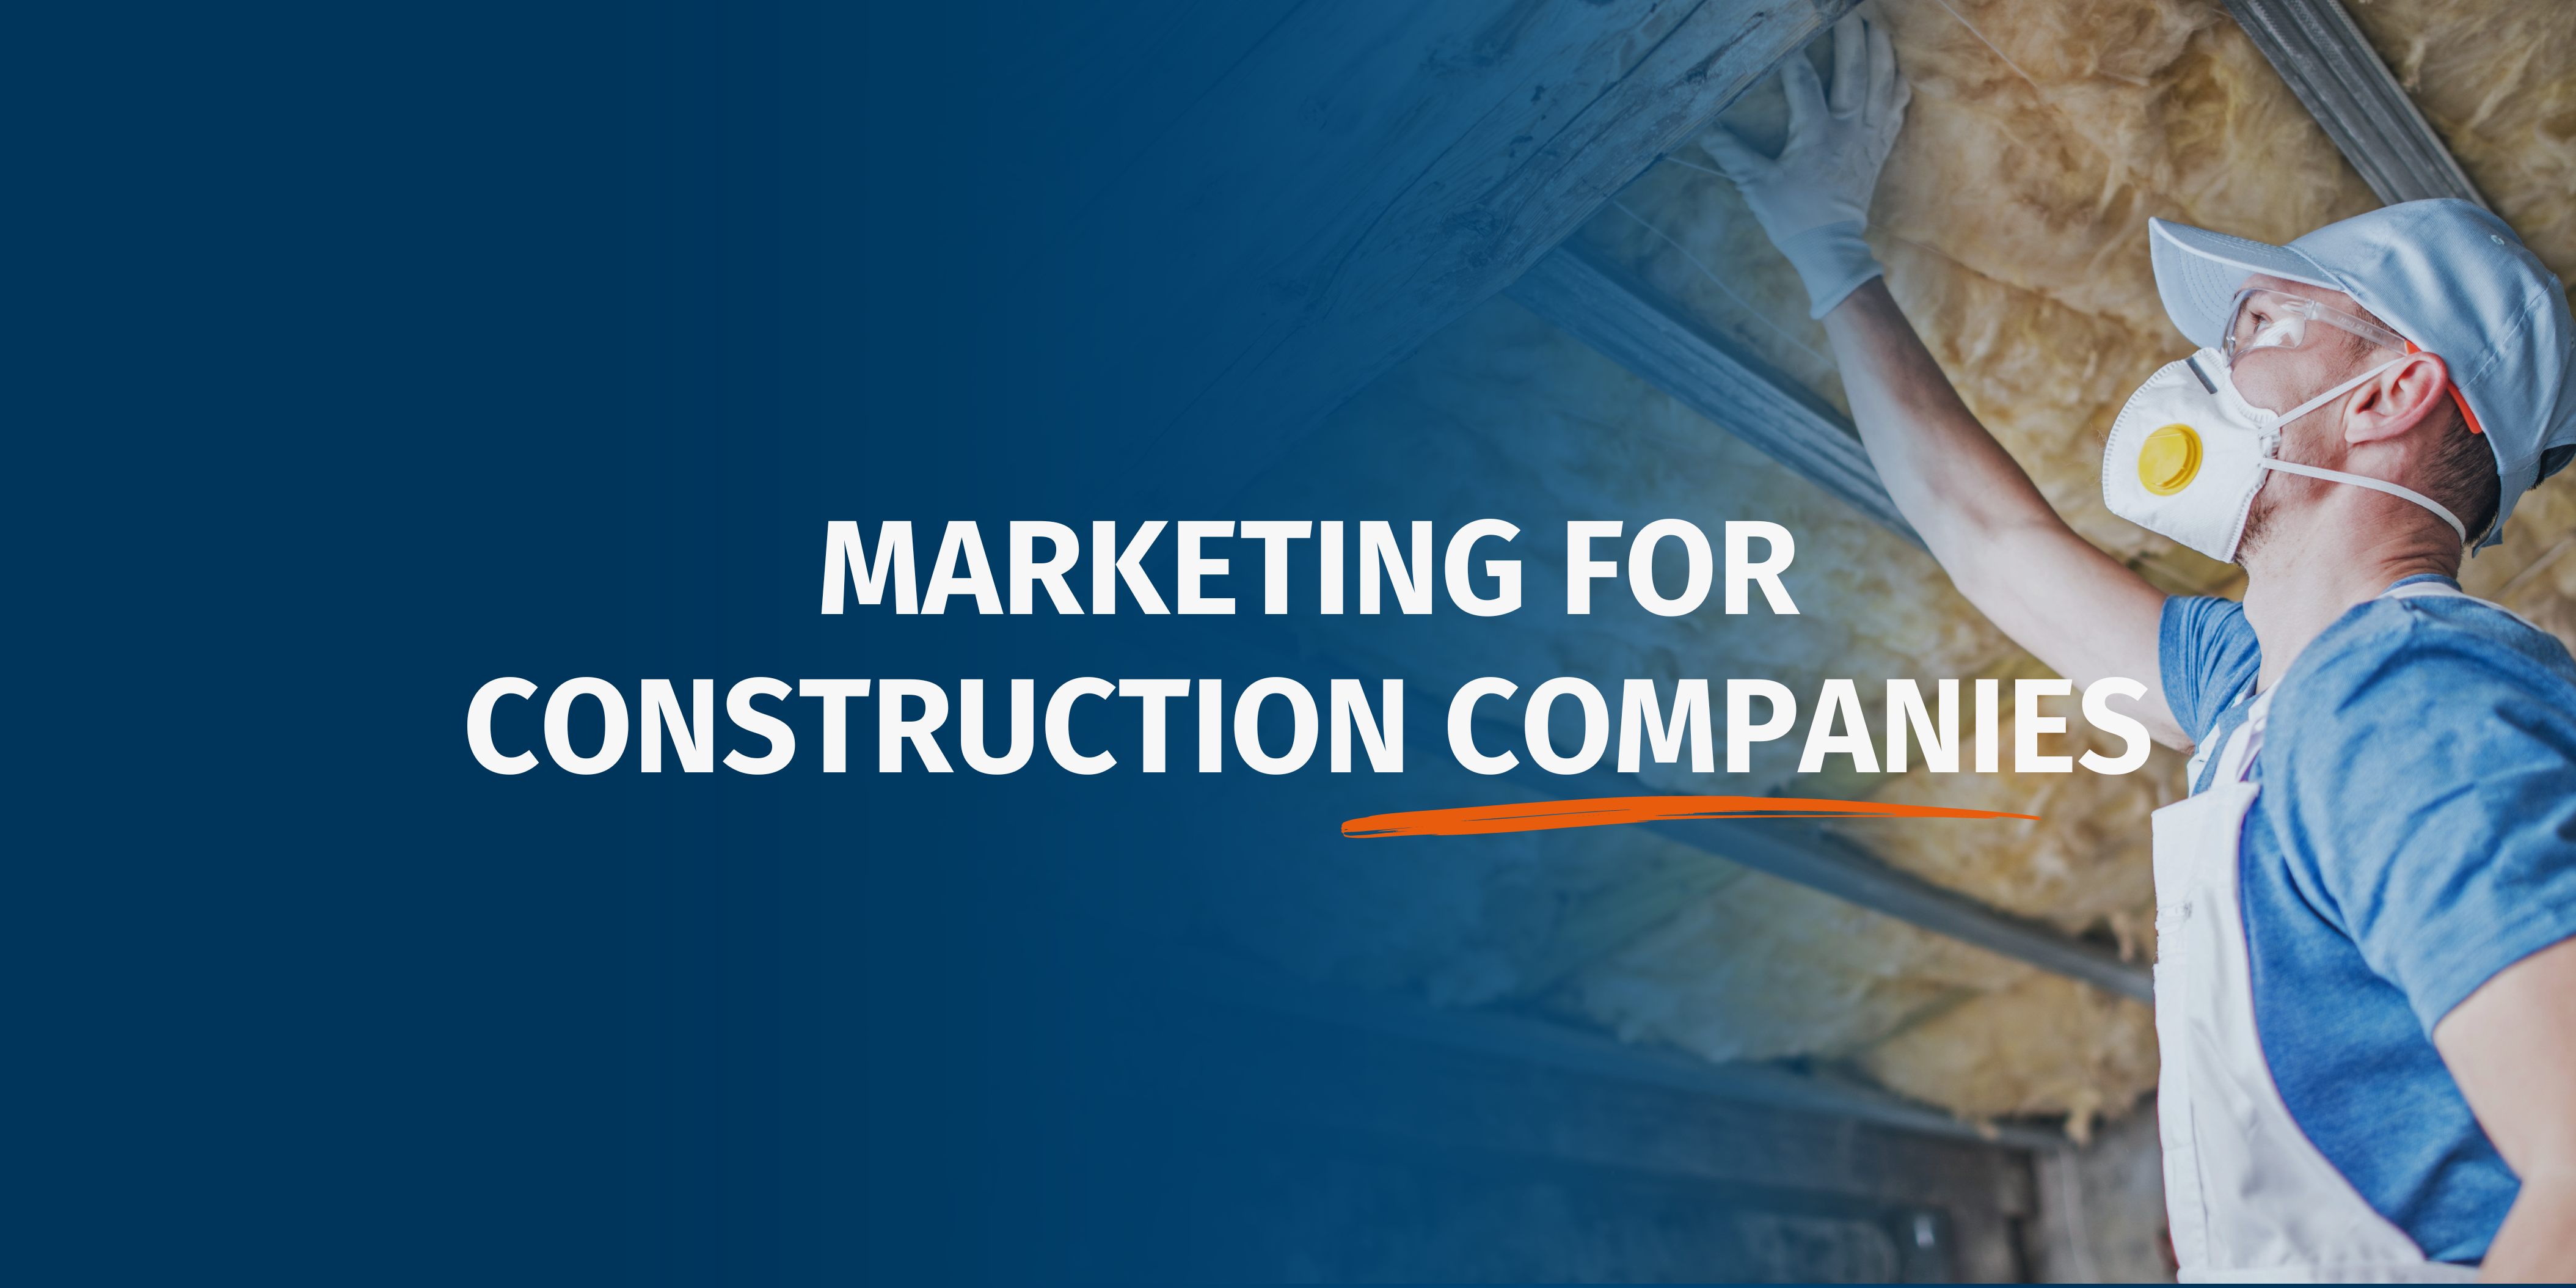 Marketing for Construction Companies: 12 Tips to Get More Clients